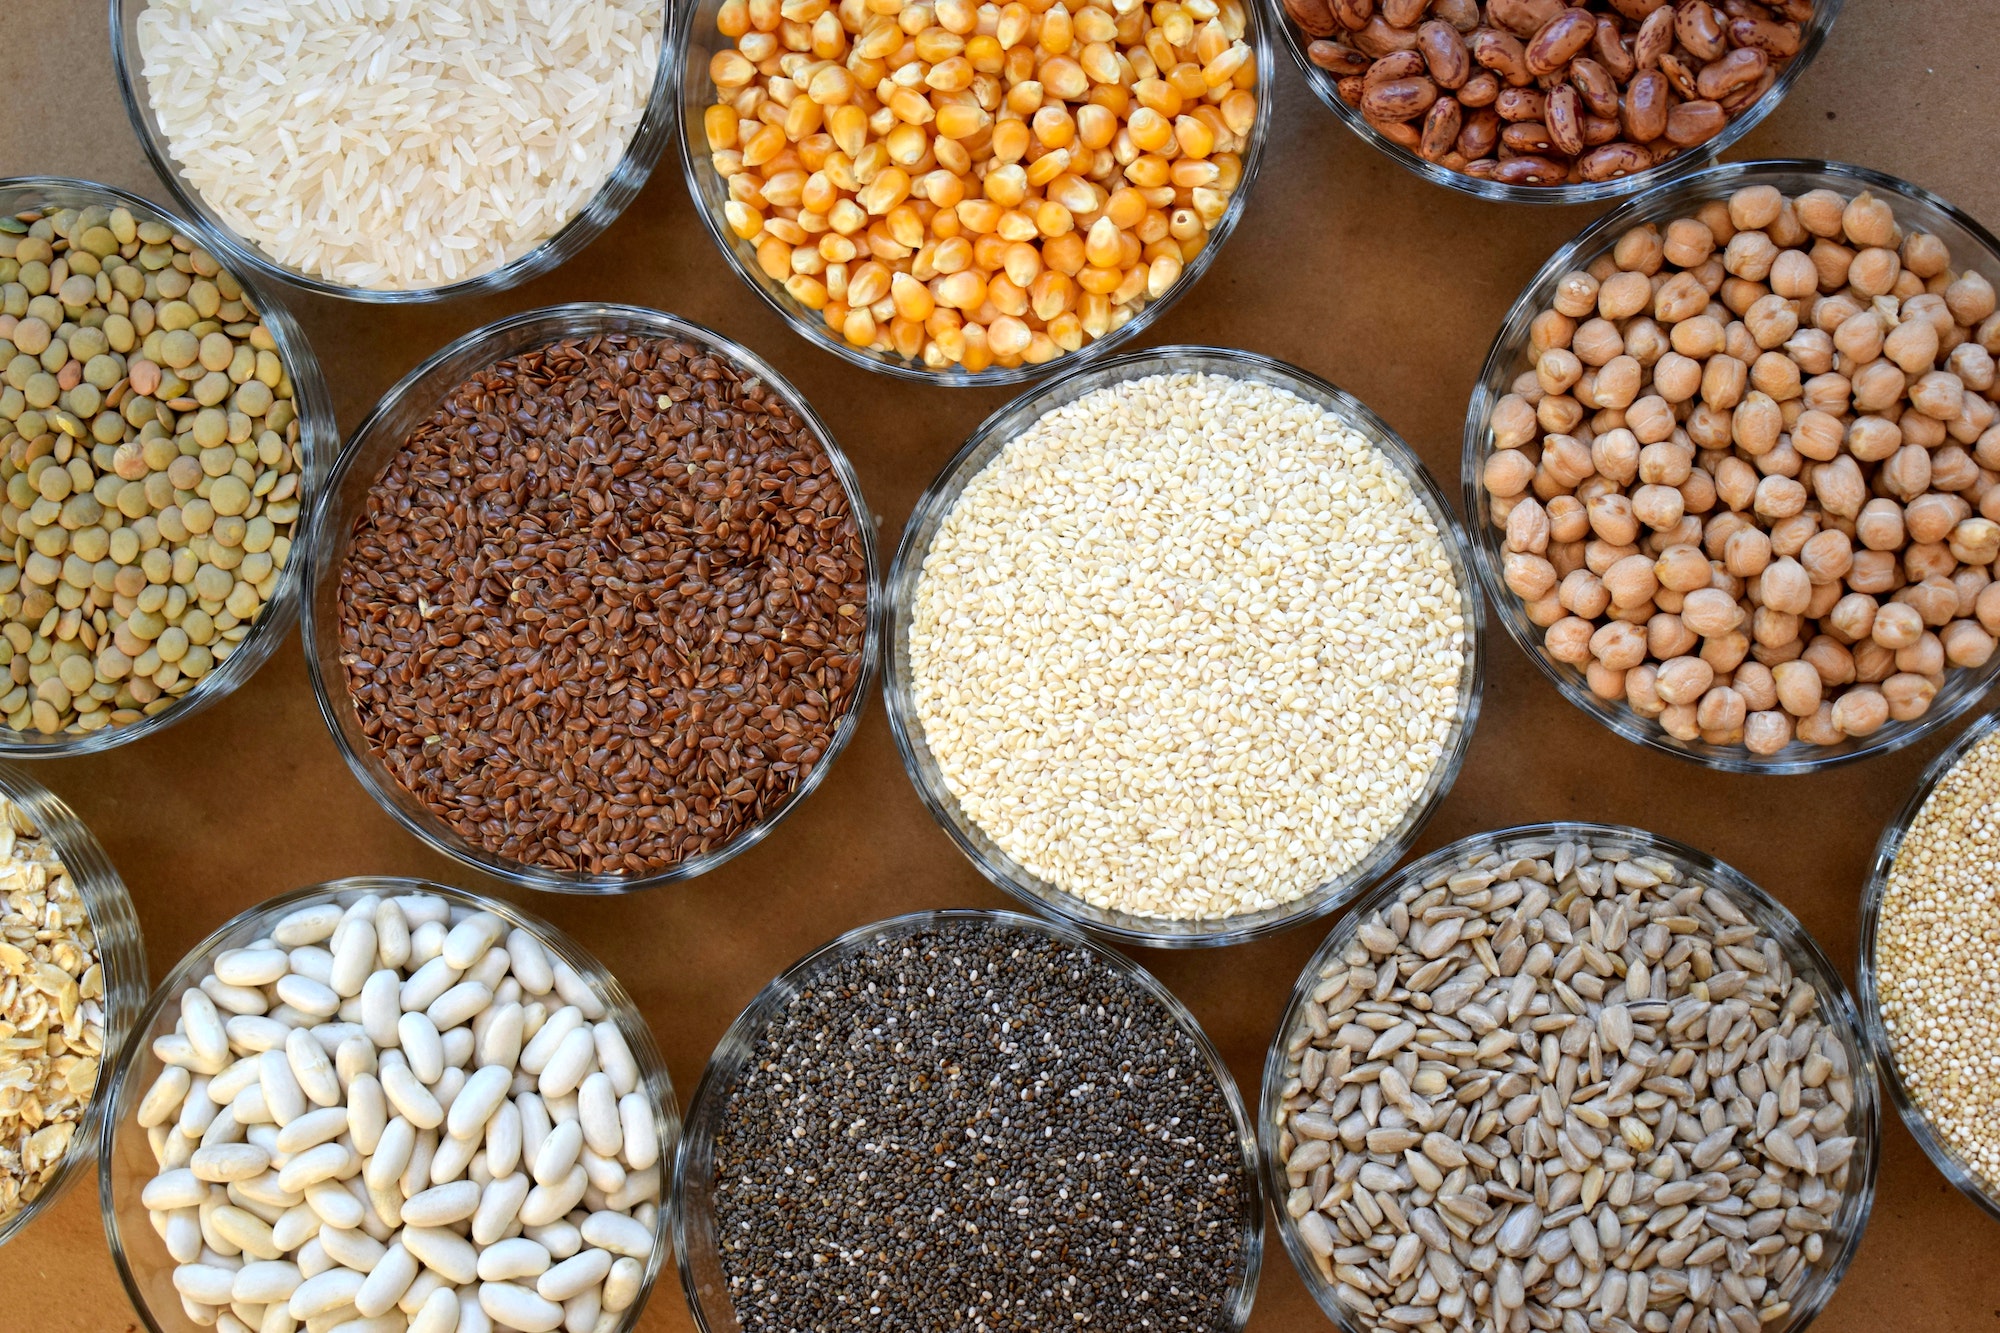 Bank on ancient grains and seeds for prime health